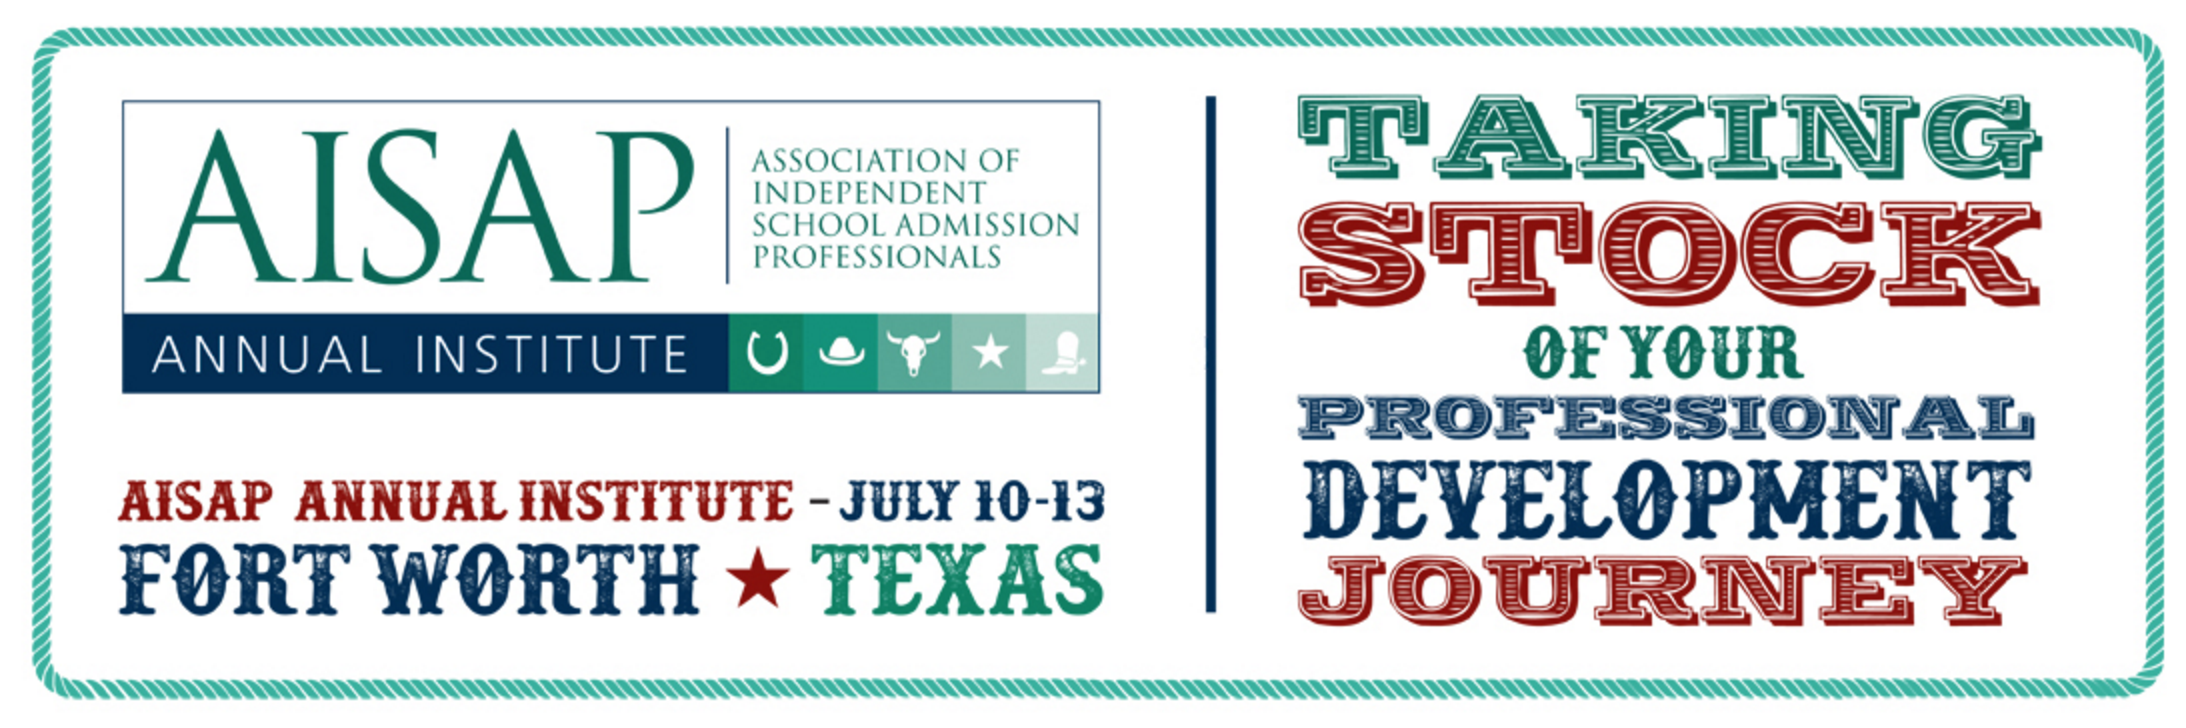 @AISAPinfo comes to Fort Worth for 11th Annual Institute in Texas